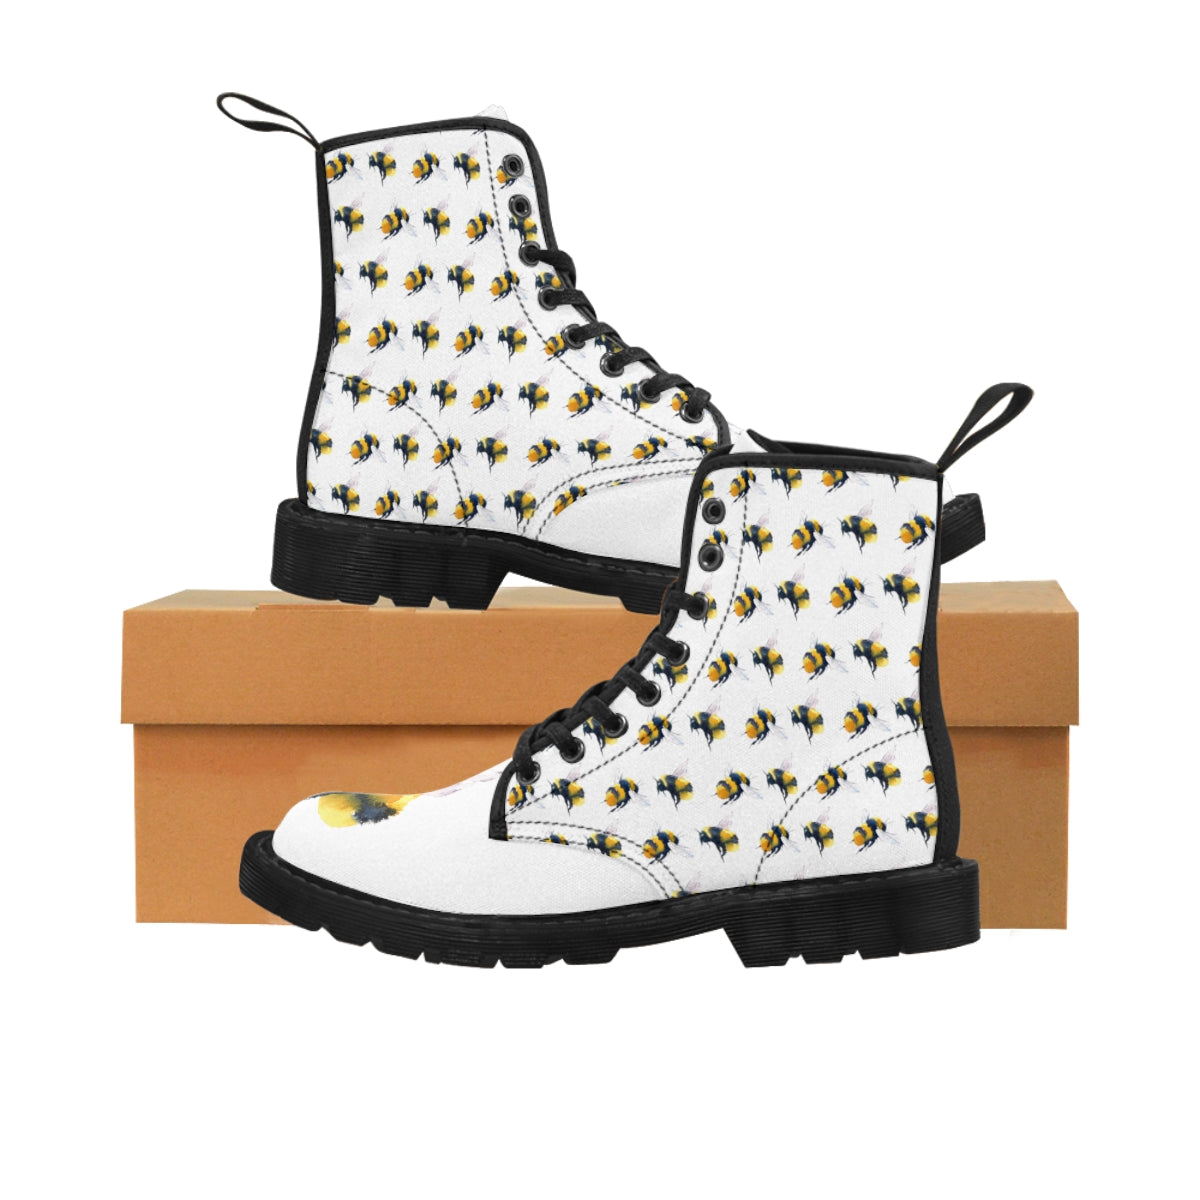 Friendly Flying Bees Women's White Canvas Boots Black Shoes Bee boots combat boots fun womens boots original art boots Shoes unique womens boots vegan boots vegan combat boots womens boots womens fashion boots